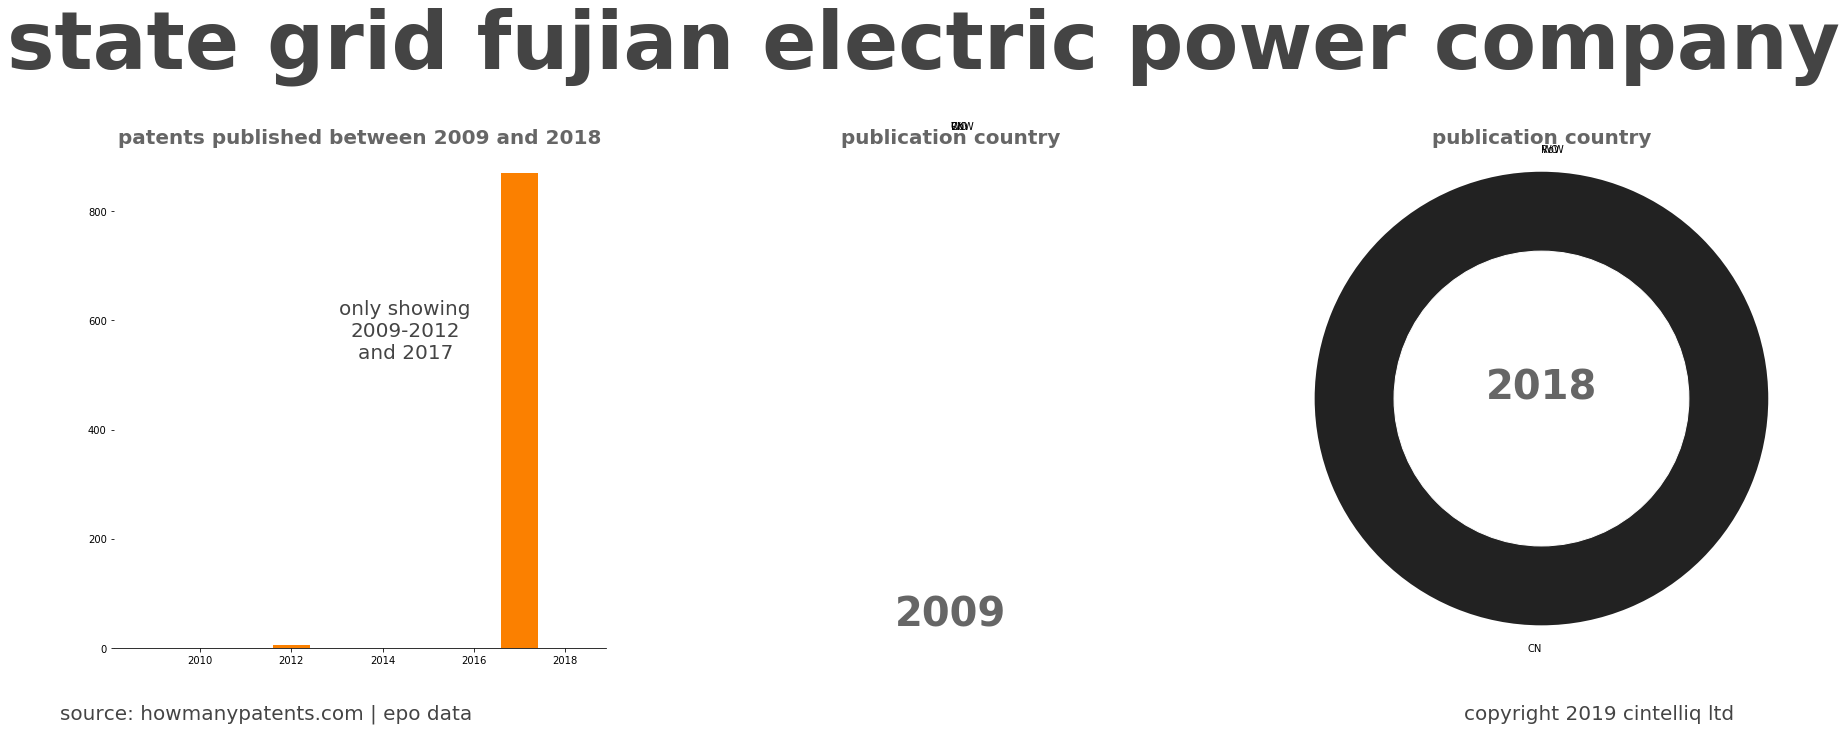 summary of patents for State Grid Fujian Electric Power Company